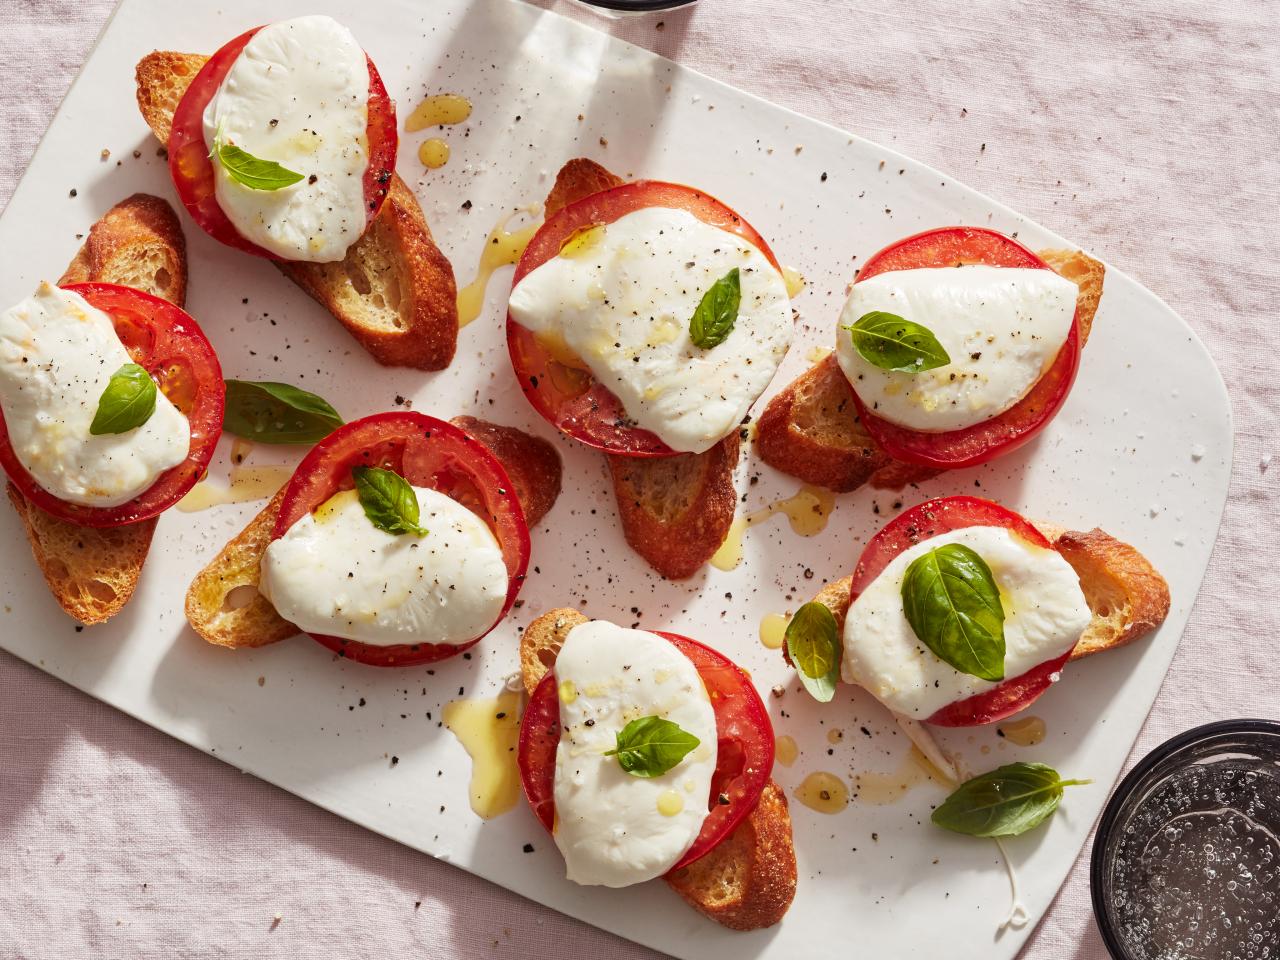 30 Best Caprese Recipes, Recipes, Dinners and Easy Meal Ideas